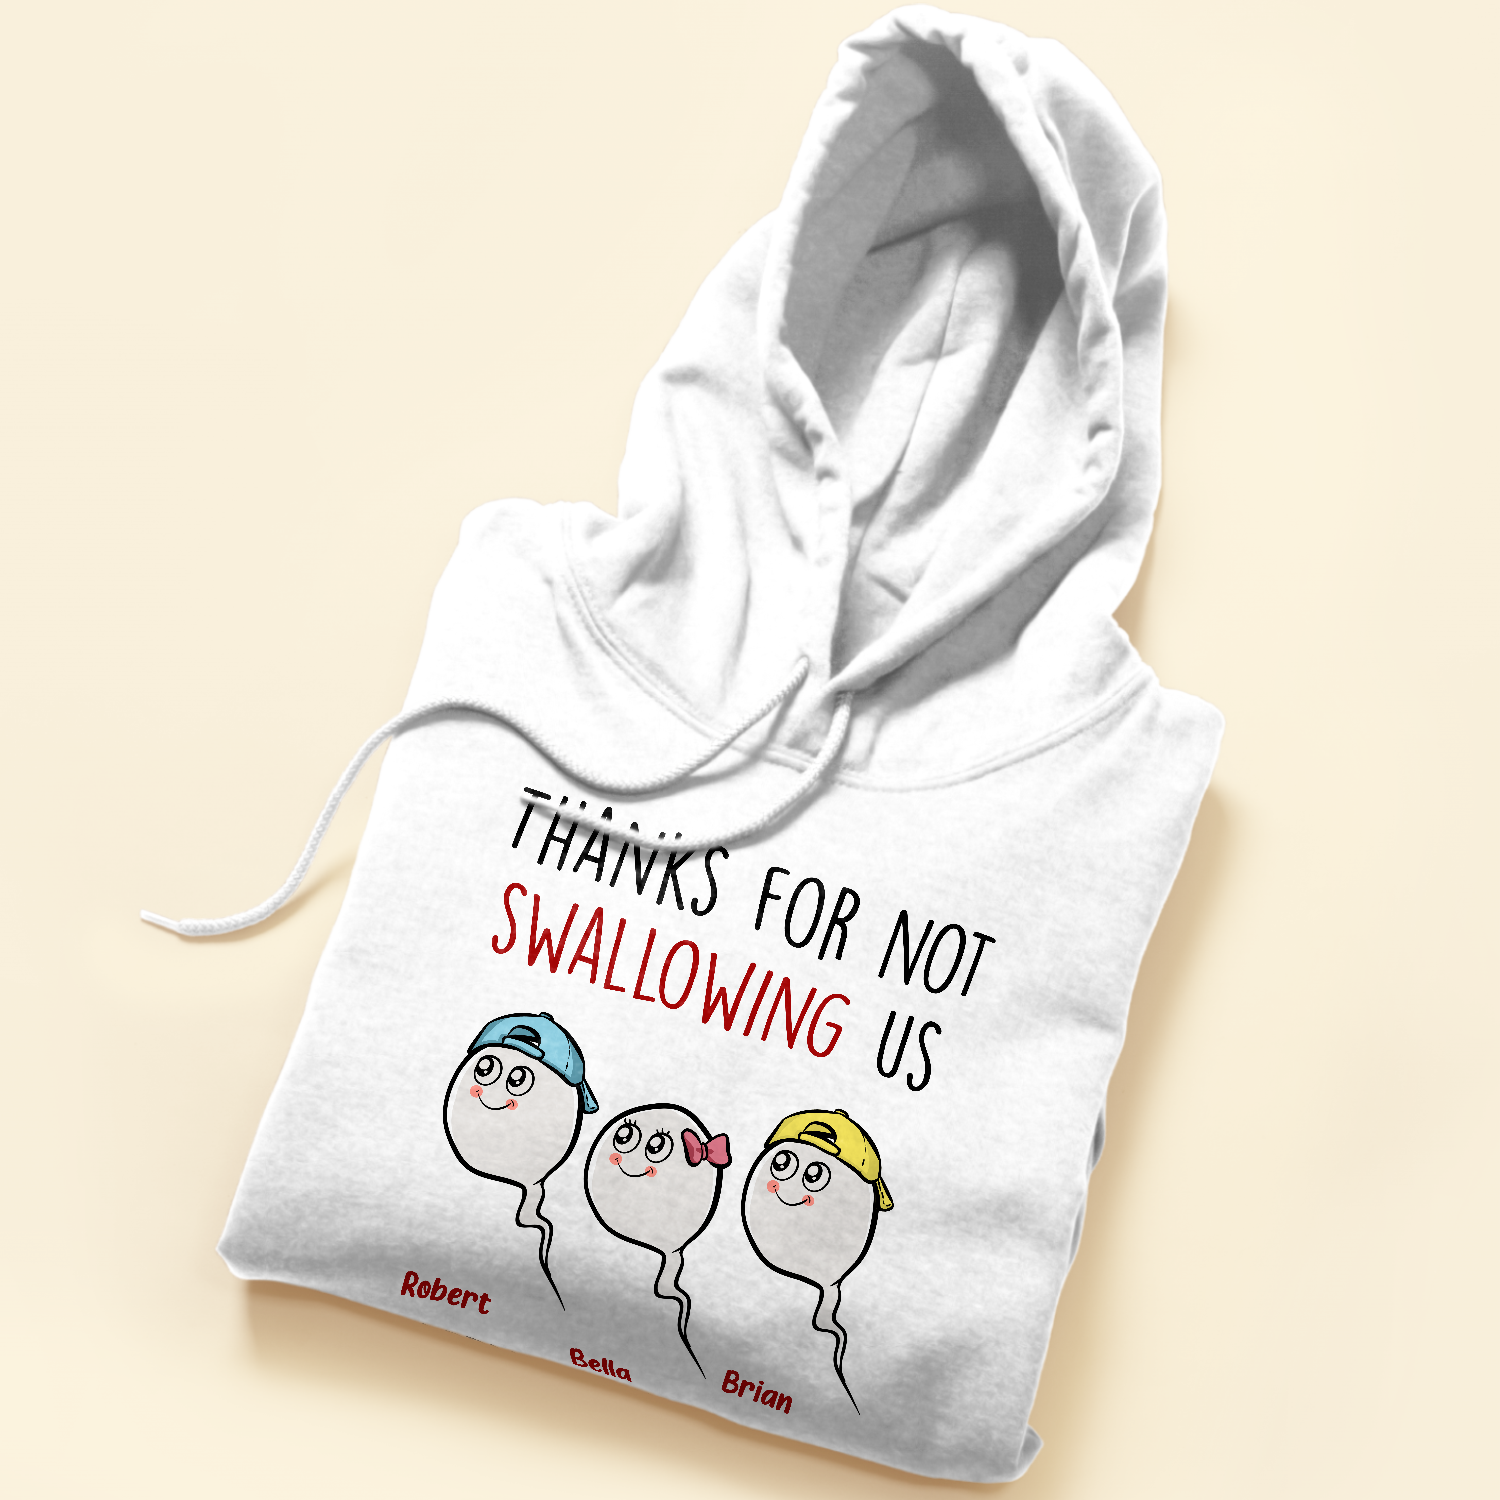 Mother's Day Gift 2023, Gift for Mom - Thanks for Not Swallowing US, Custom Photo Shirt, PersonalFury, Basic Tee / White / 3XL